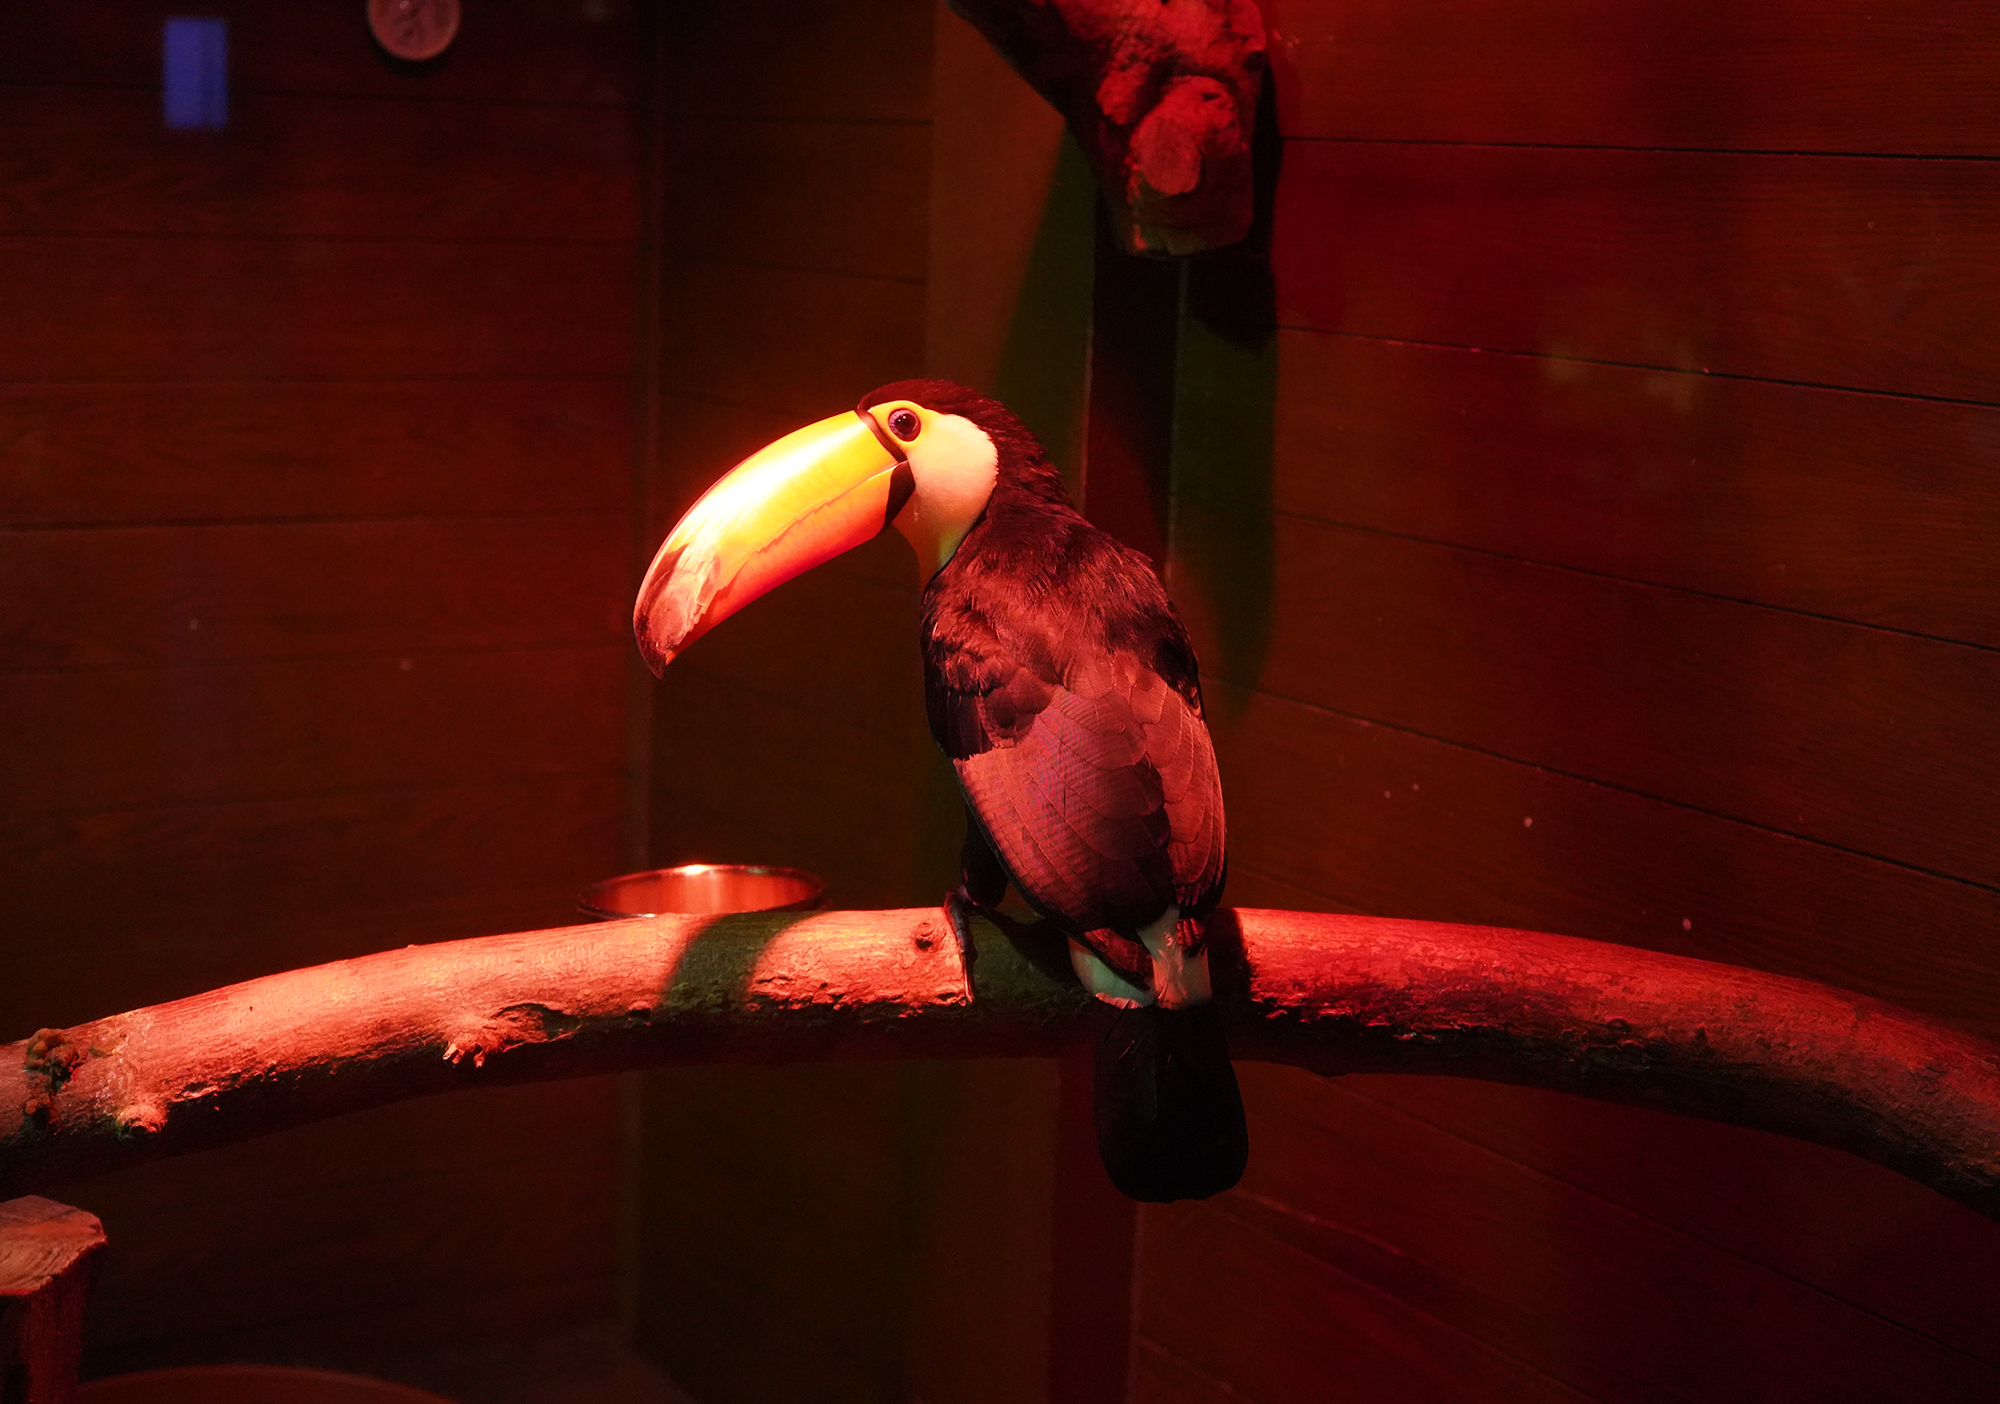 A toucan in a glass enclosure